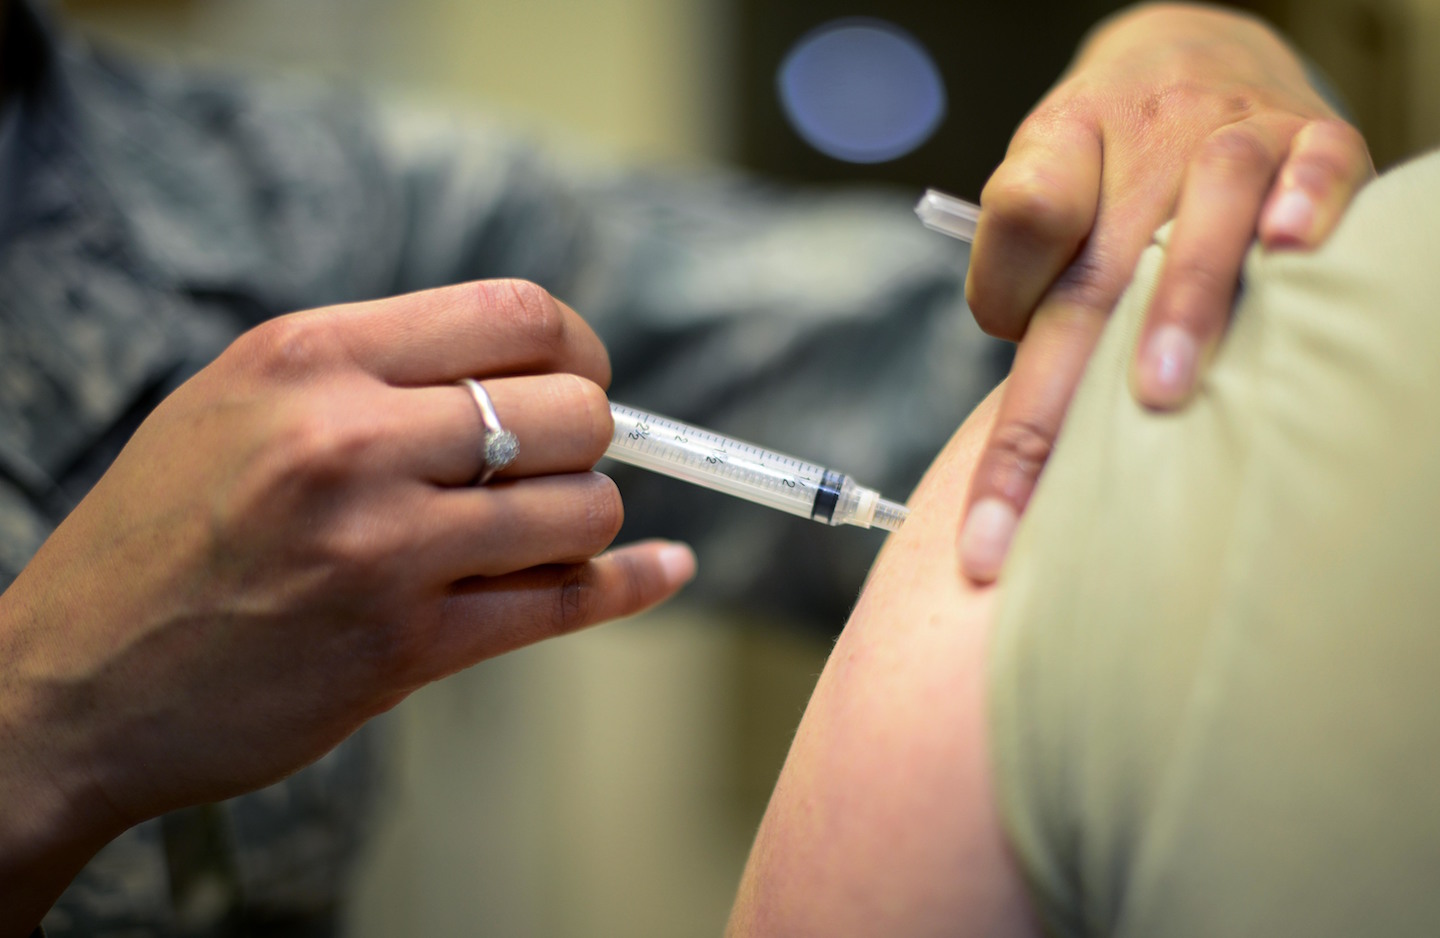 Image: Annual flu shots linked to increased risk of miscarriage